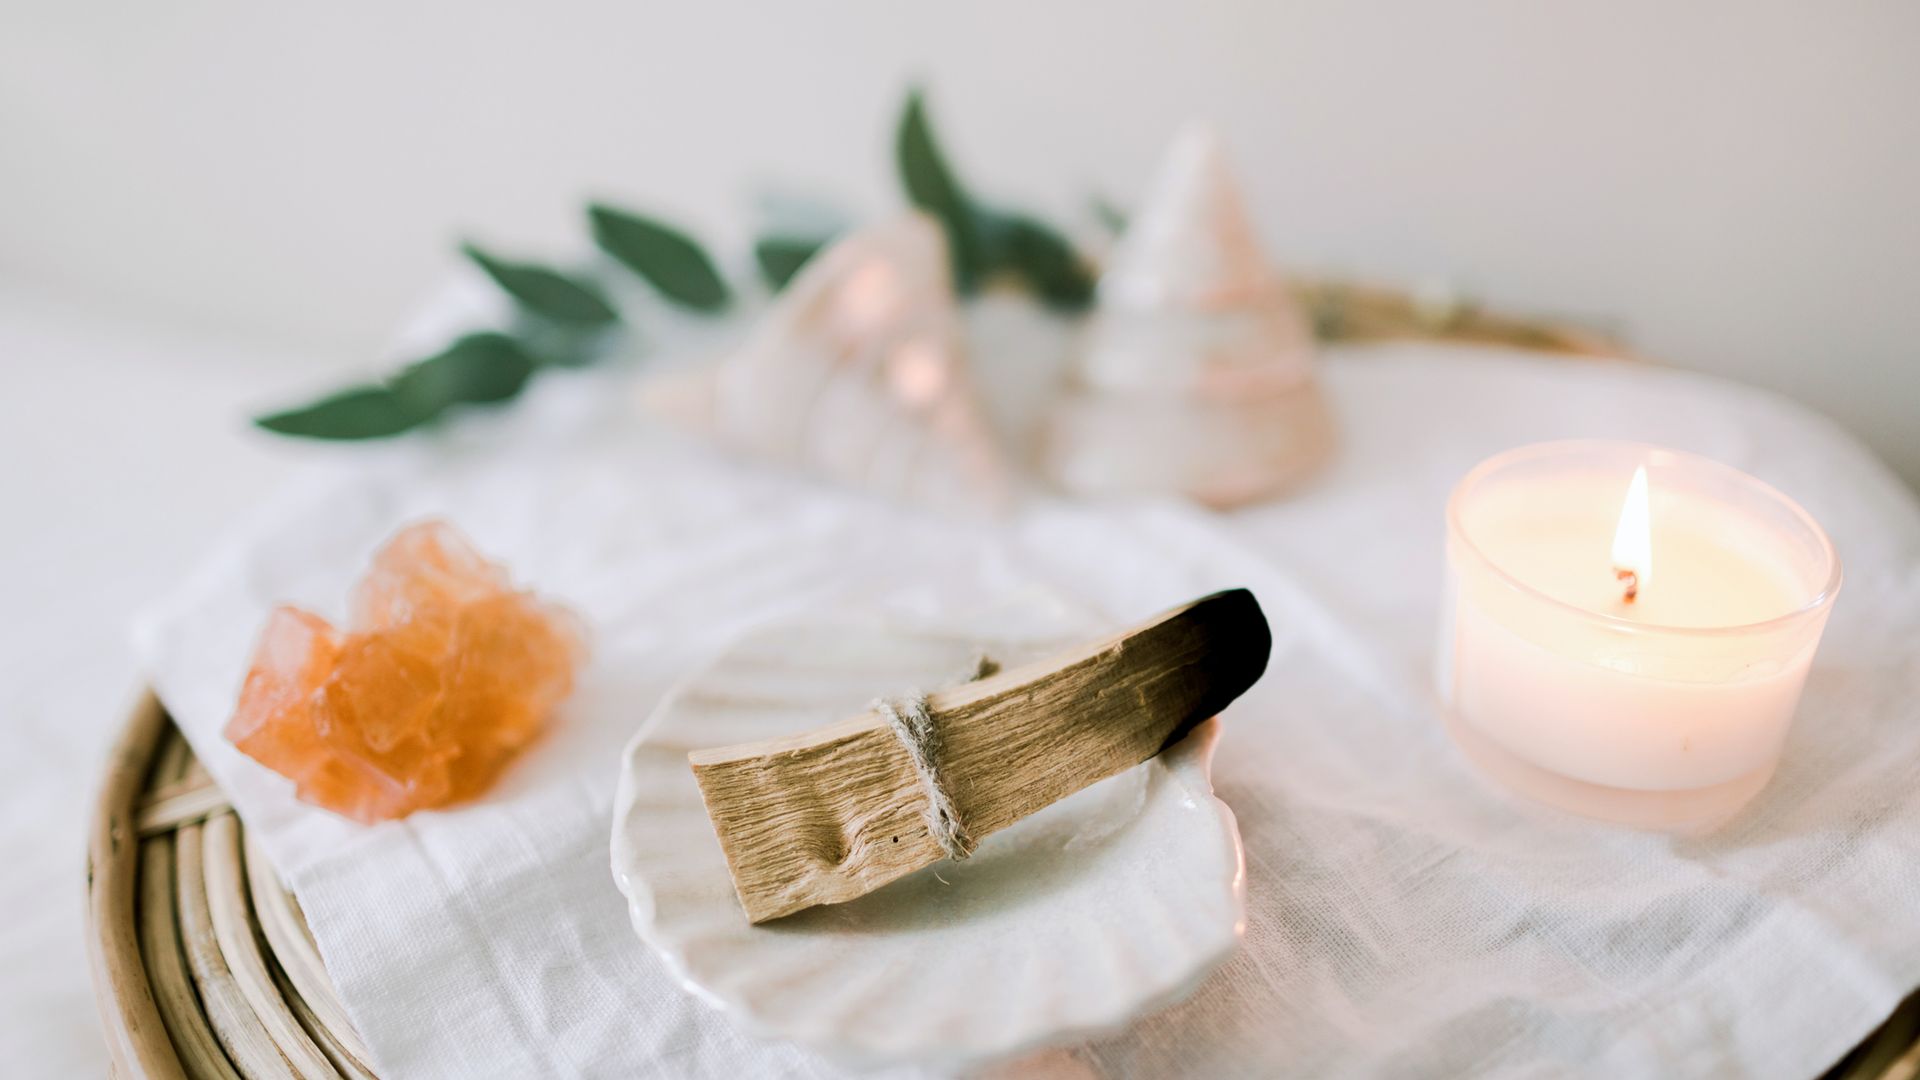 A wooden tray with ceramic plate on a linen cloth, eucalyptus leaves, candle, sea shells  and Palo Santo ready to burn. Ritual objects for spiritual practice. Ceremony with Palo Santo. Mental health.